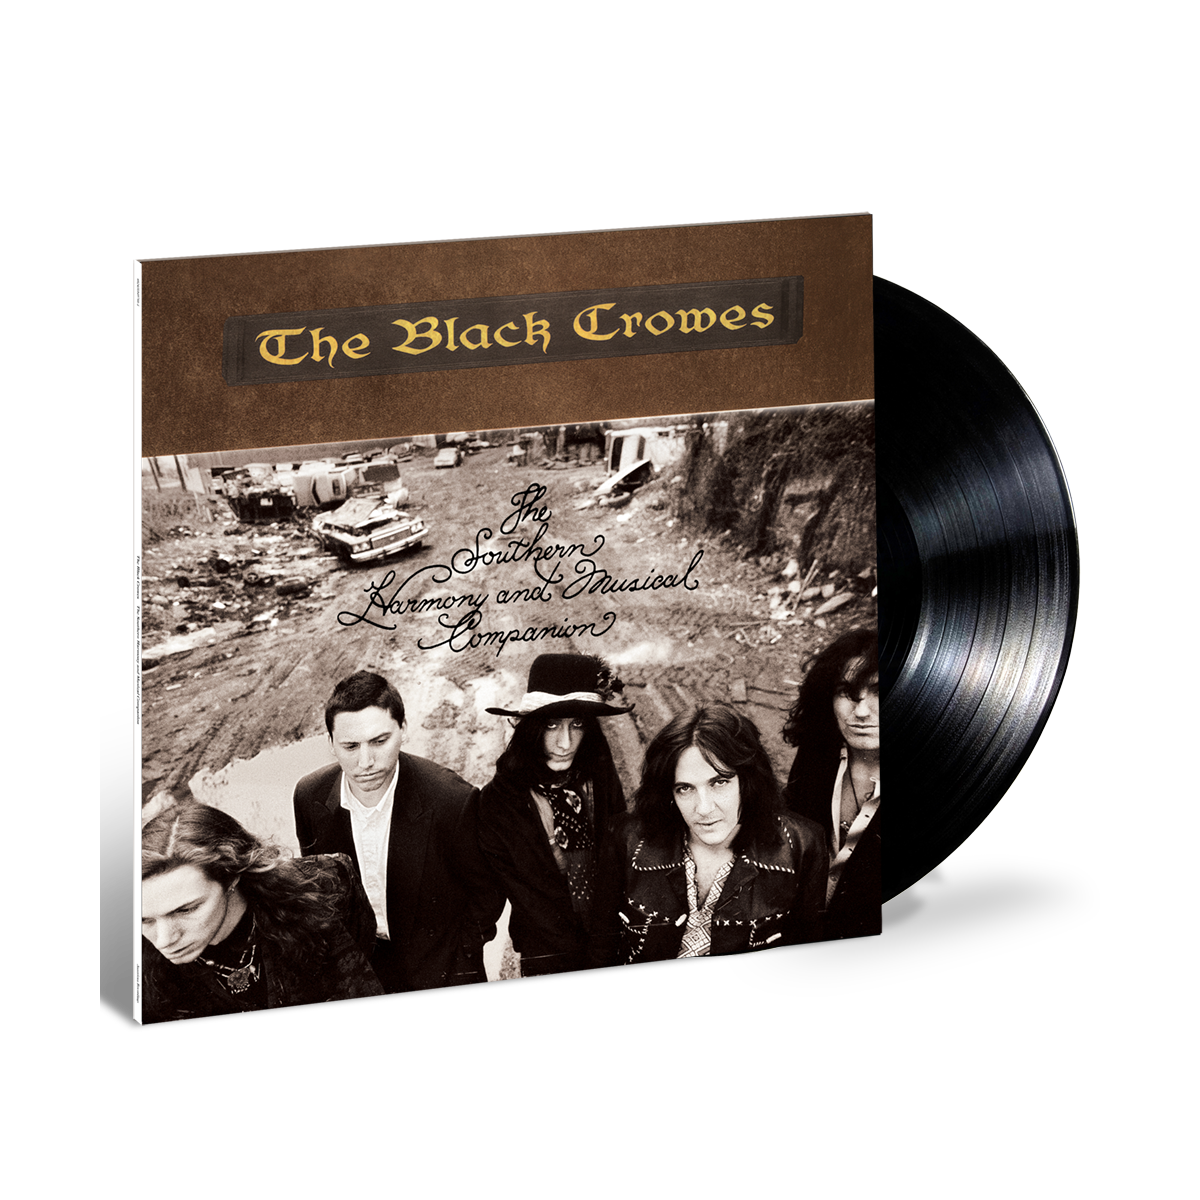 The Black Crowes - The Southern Harmony And Musical Companion: Vinyl LP